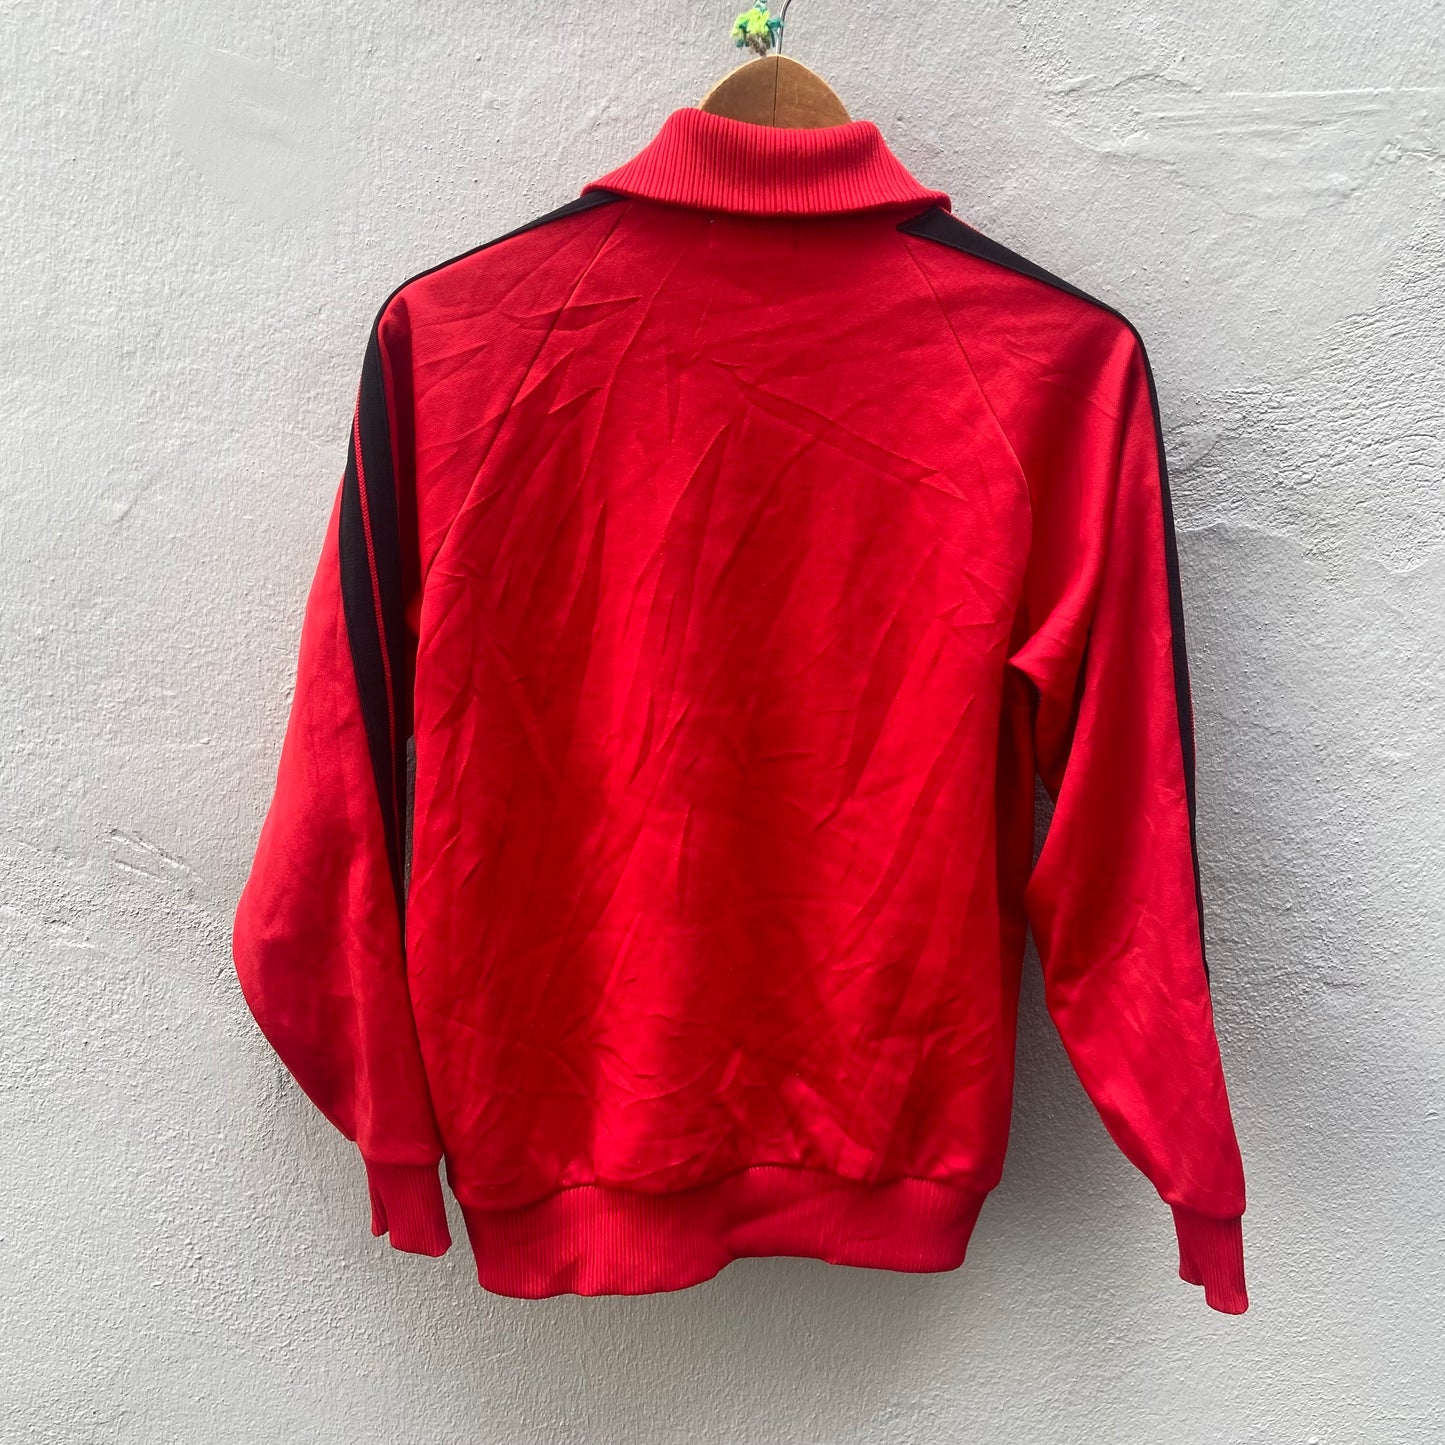 80s Red Asics Track Suit